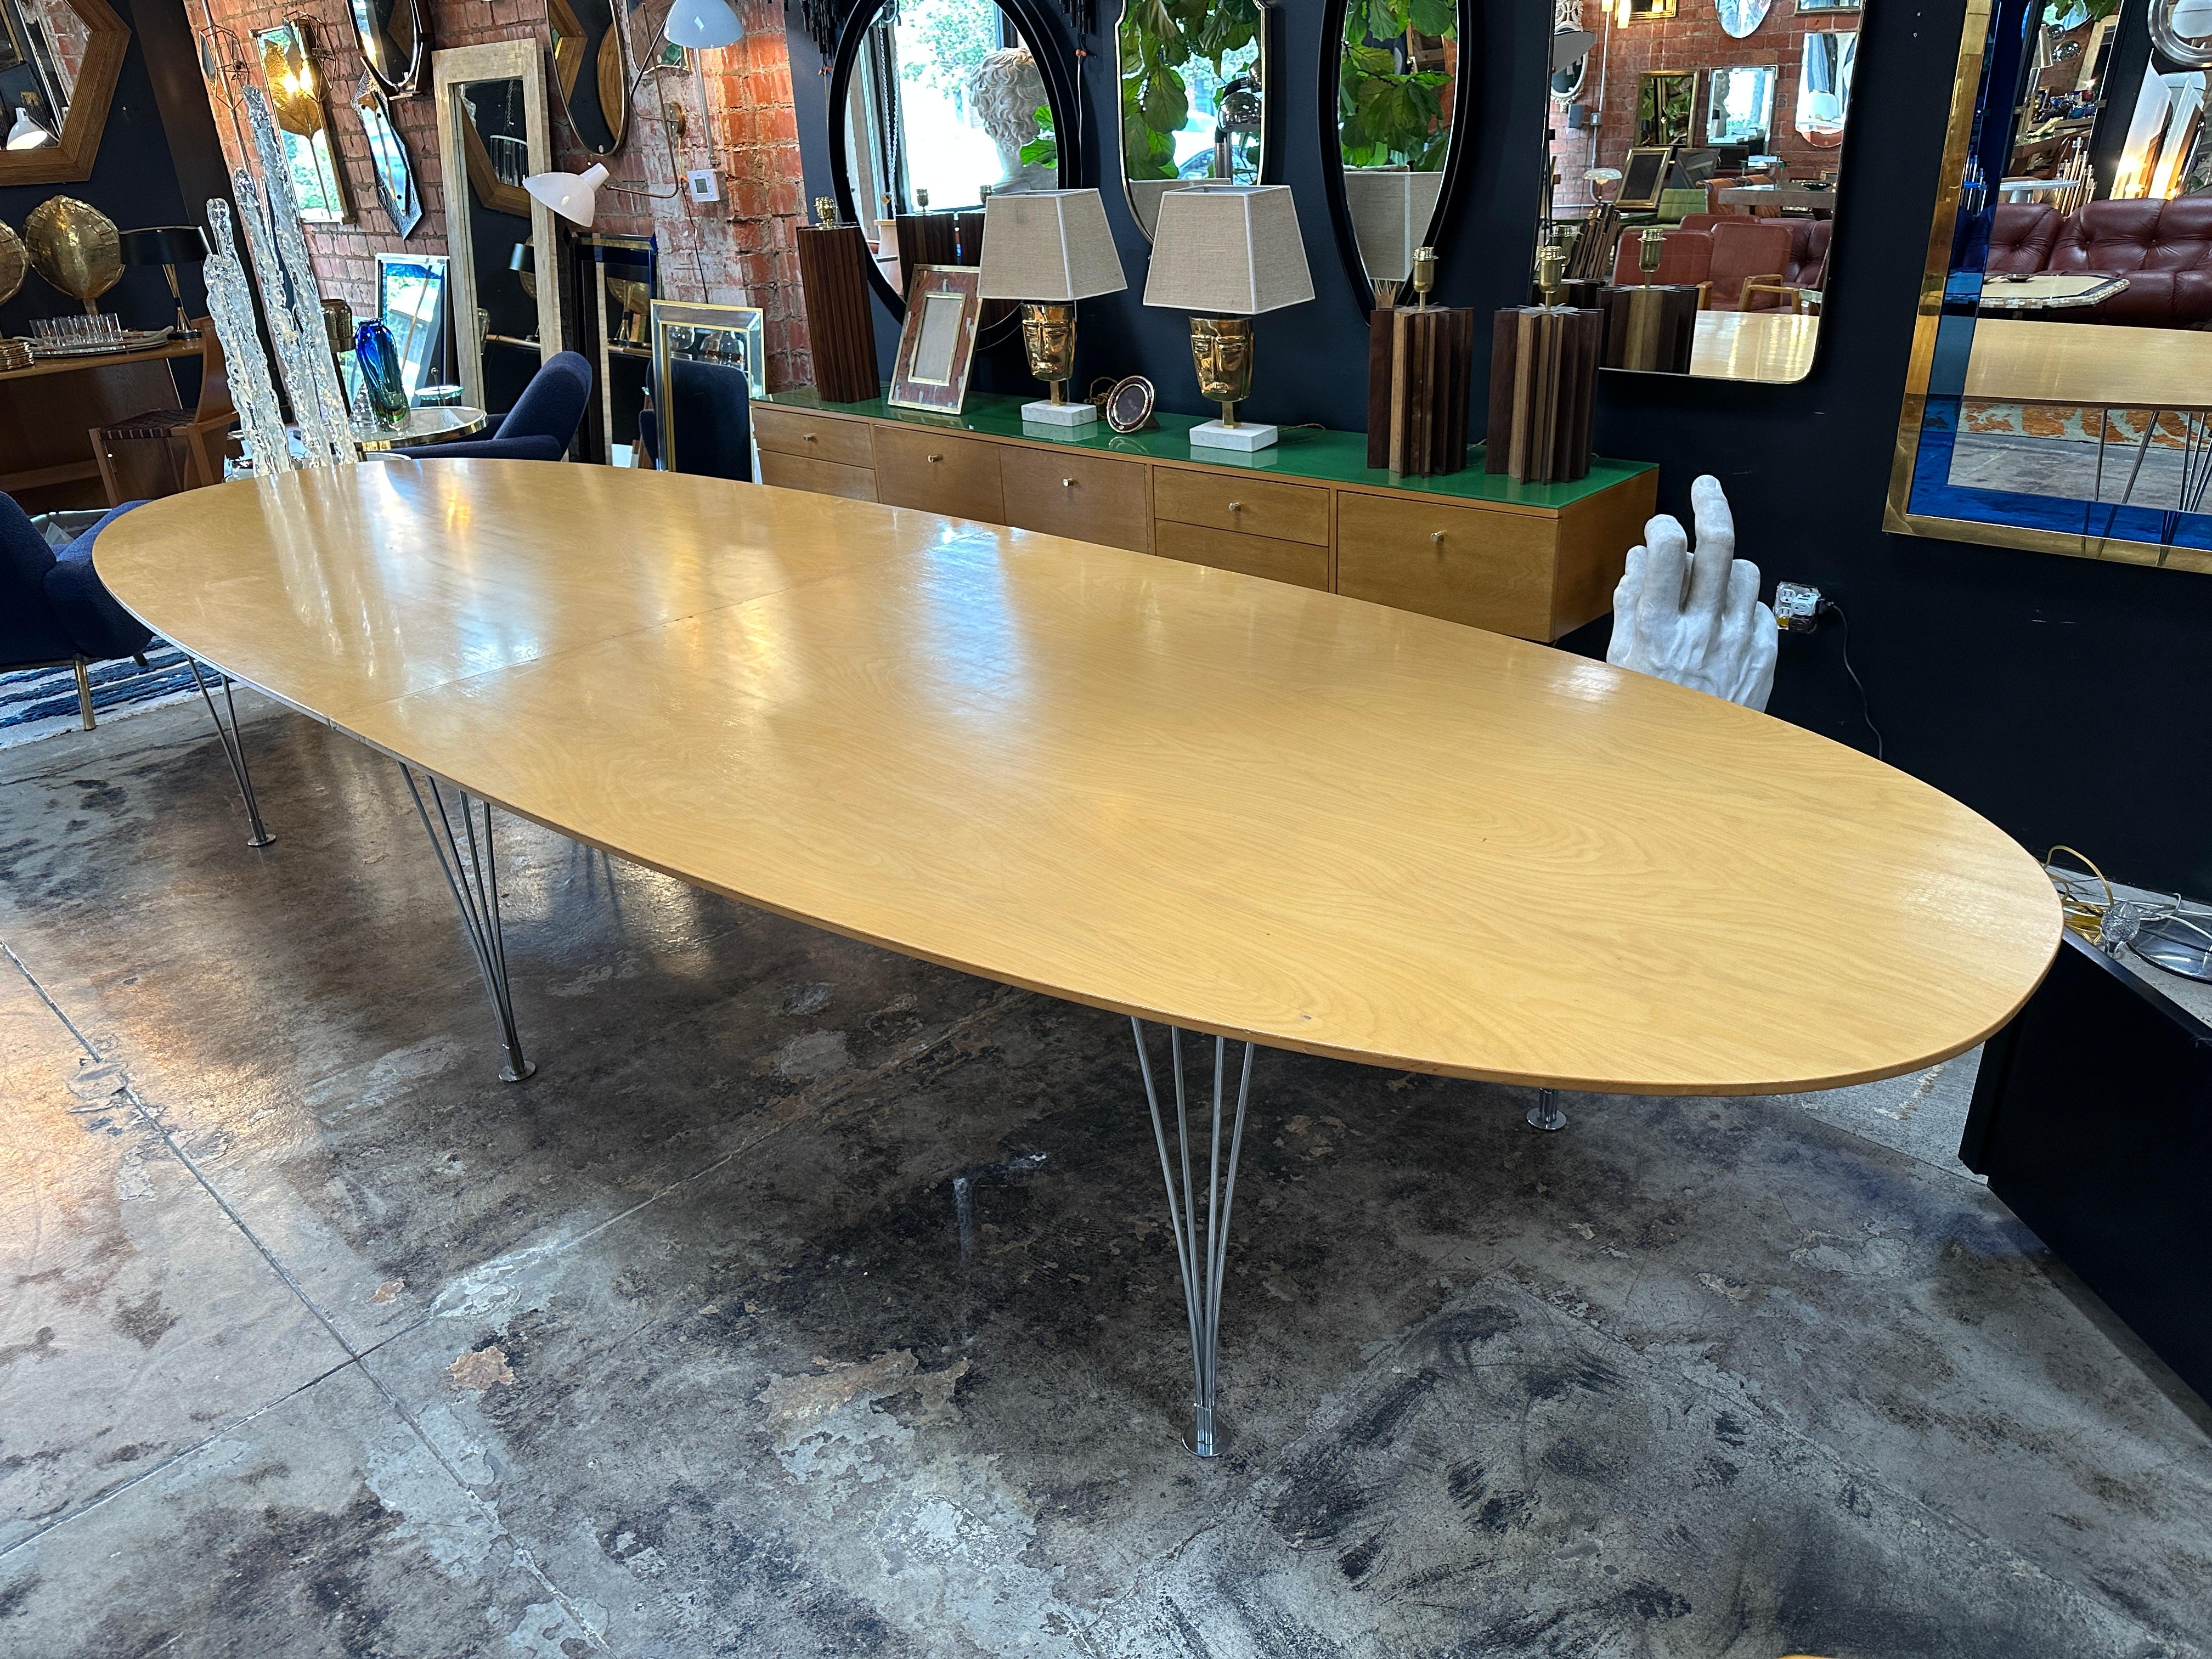 Experience timeless elegance with our Mid Century Oval Oversize Dining Table from the 1980s. This stunning piece features a sleek oval top crafted from wood, supported by six stylish chrome legs. The design captures the essence of mid-century modern